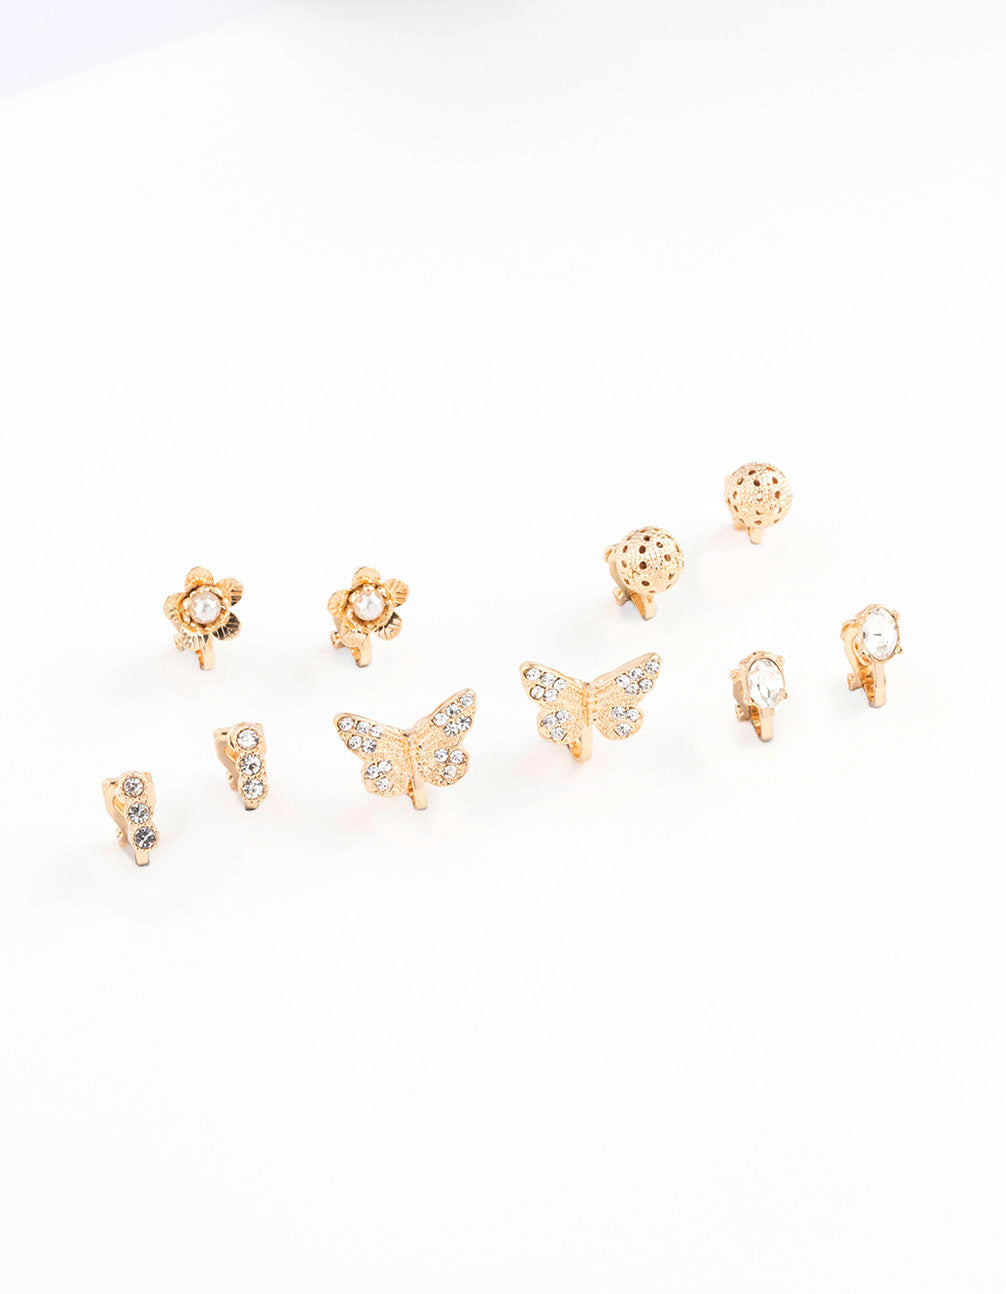 Variety is the Spice of Life. Delightful Mix of Clip Earrings